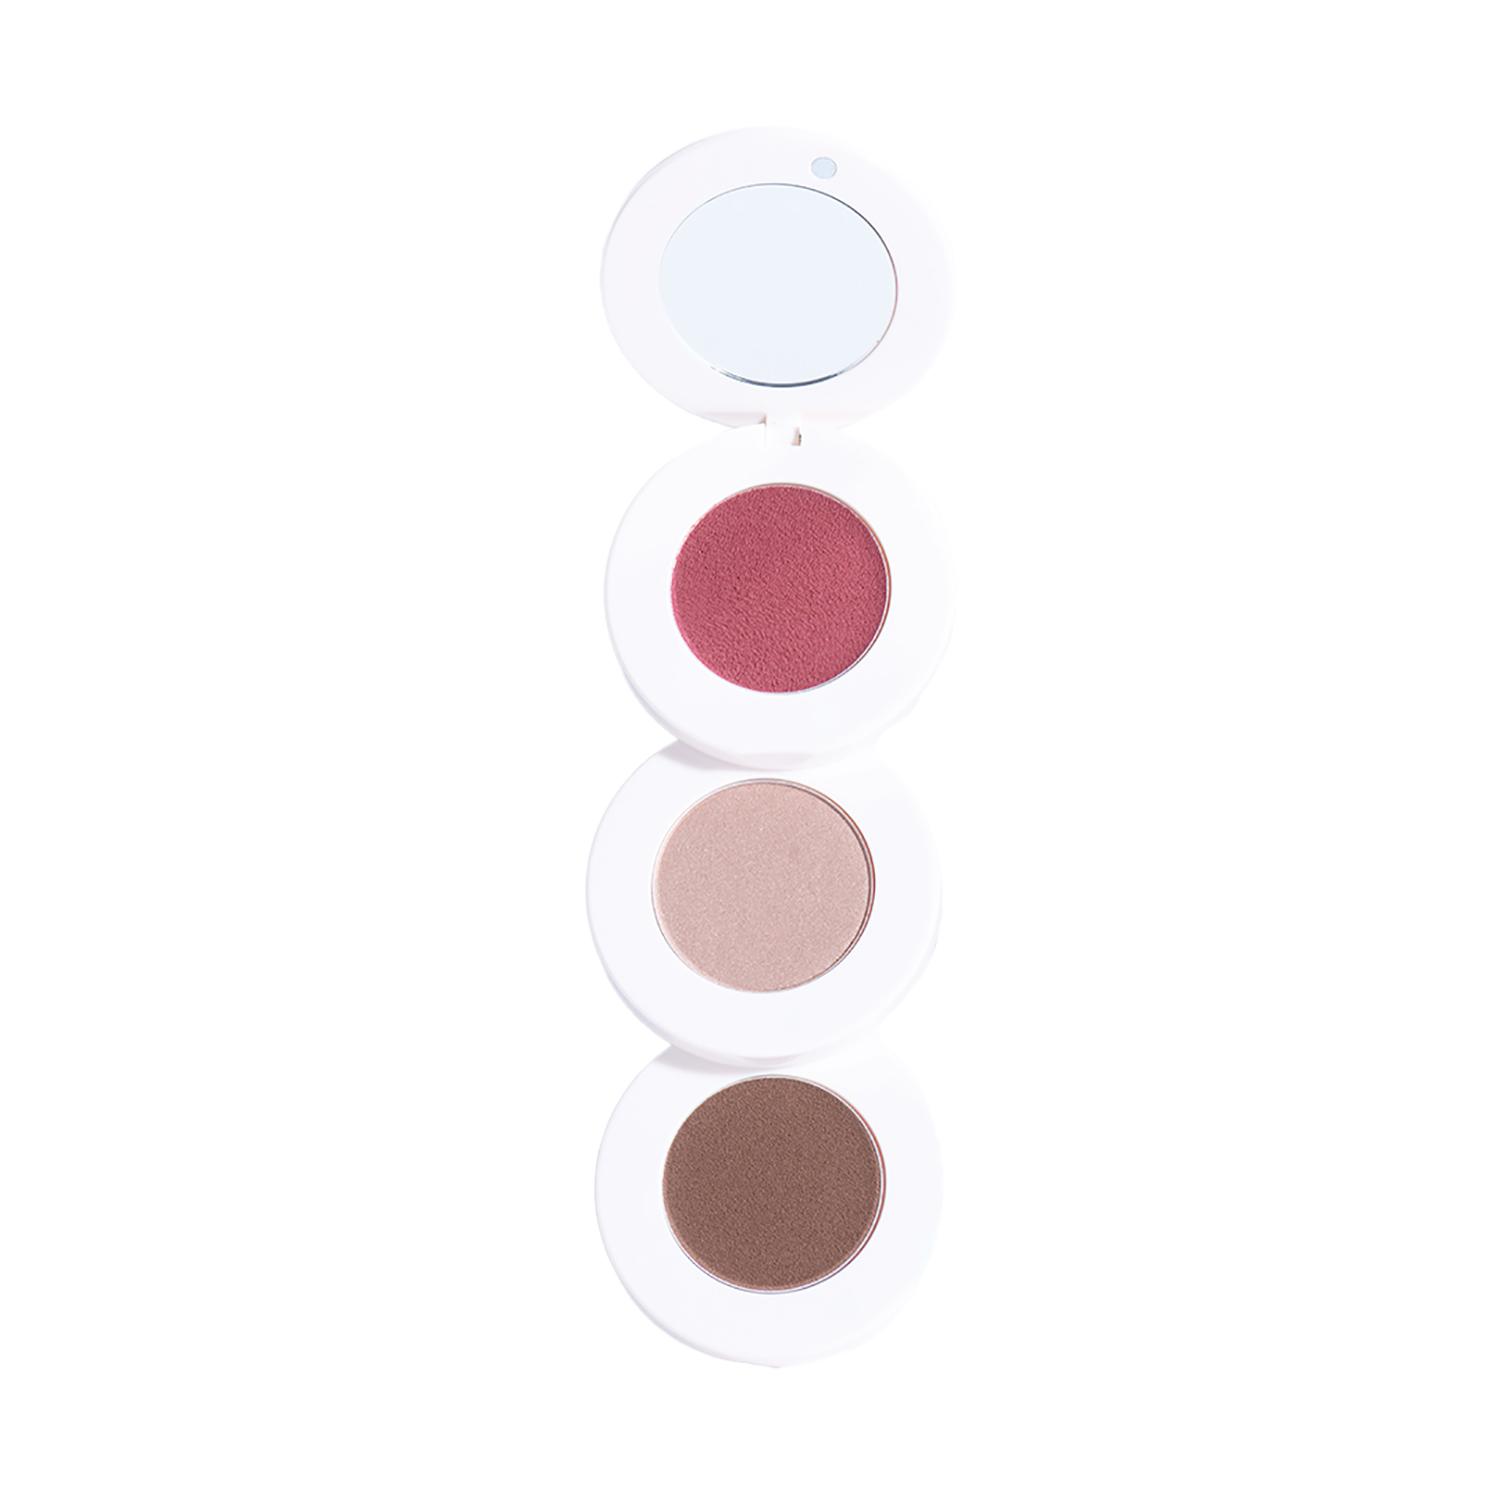 Gush Beauty | Gush Beauty Stacked In Your Favour Multi-Purpose Face Palette - Day In And Day Out (6.9g)